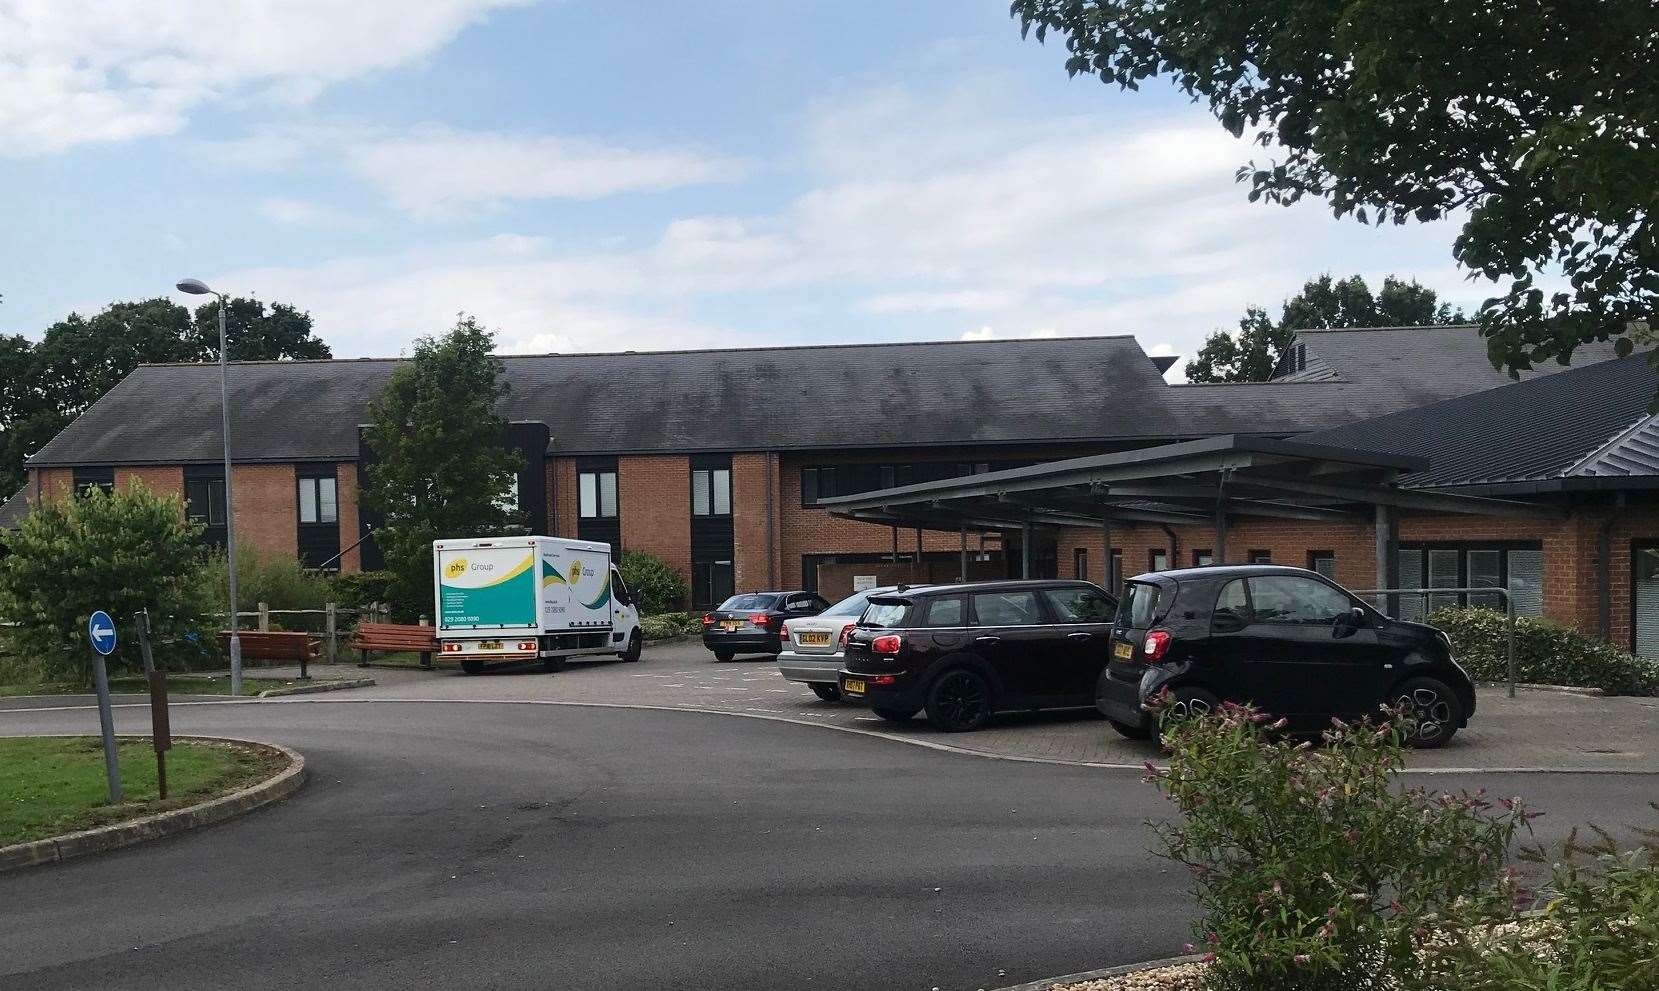 The West View care facility in Tenterden